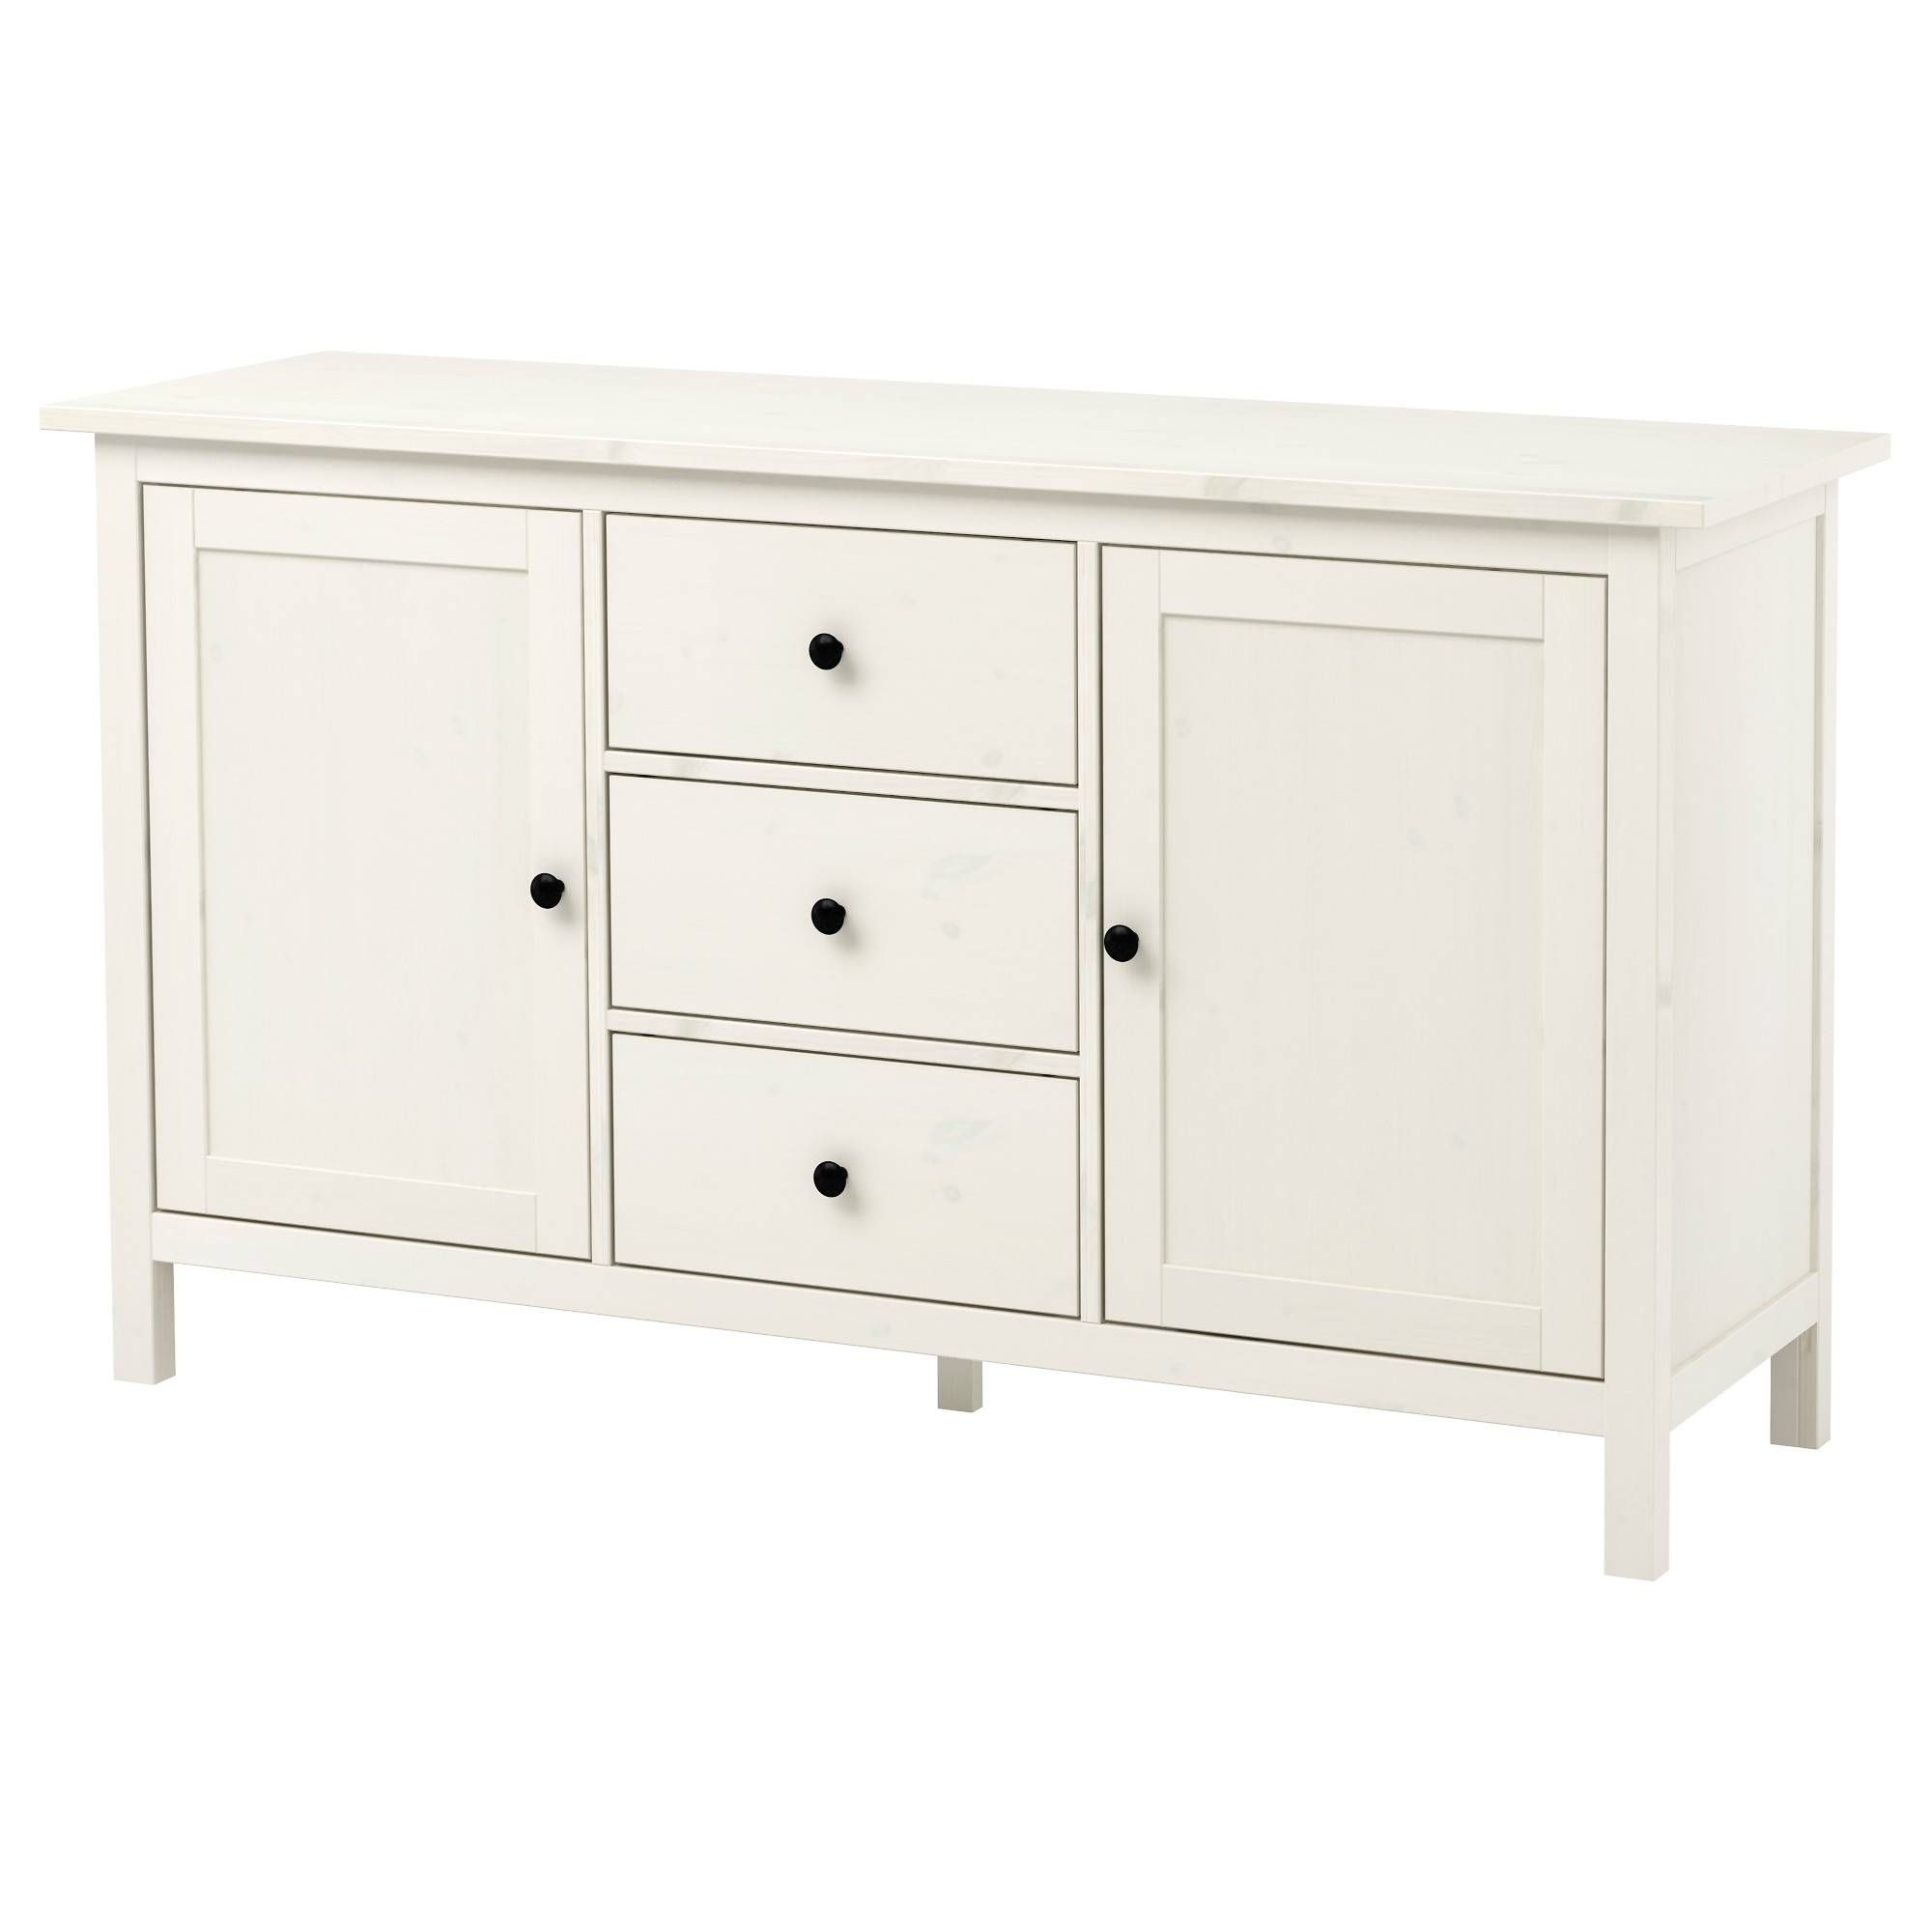 Hemnes Sideboard – White Stain – Ikea Intended For White Sideboard Cabinets (View 2 of 15)